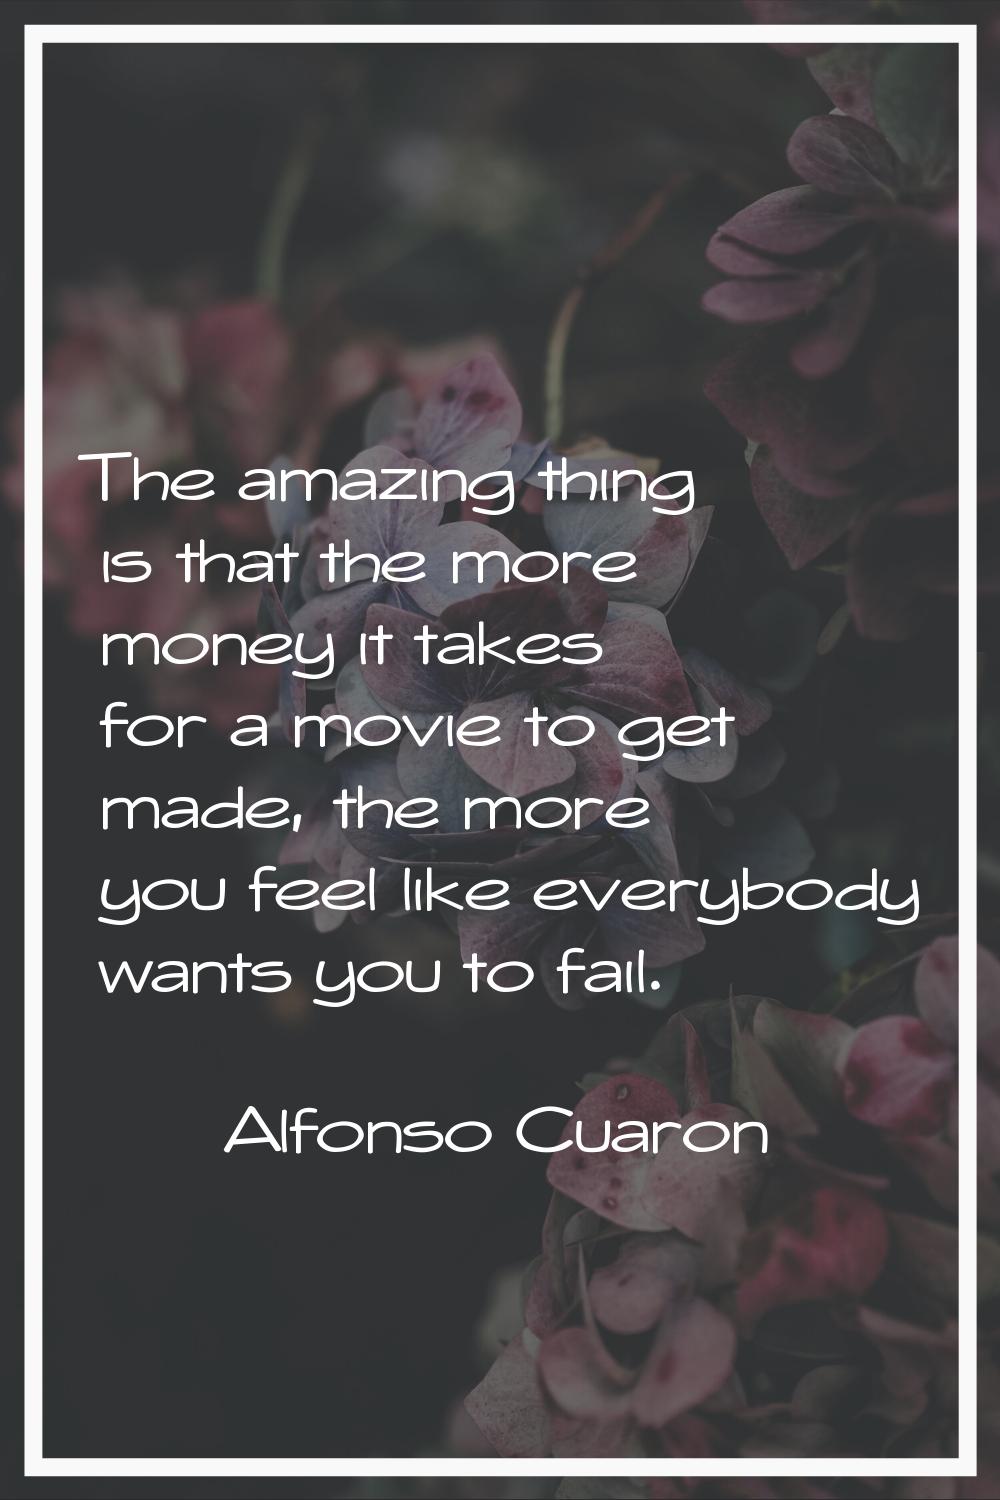 The amazing thing is that the more money it takes for a movie to get made, the more you feel like e